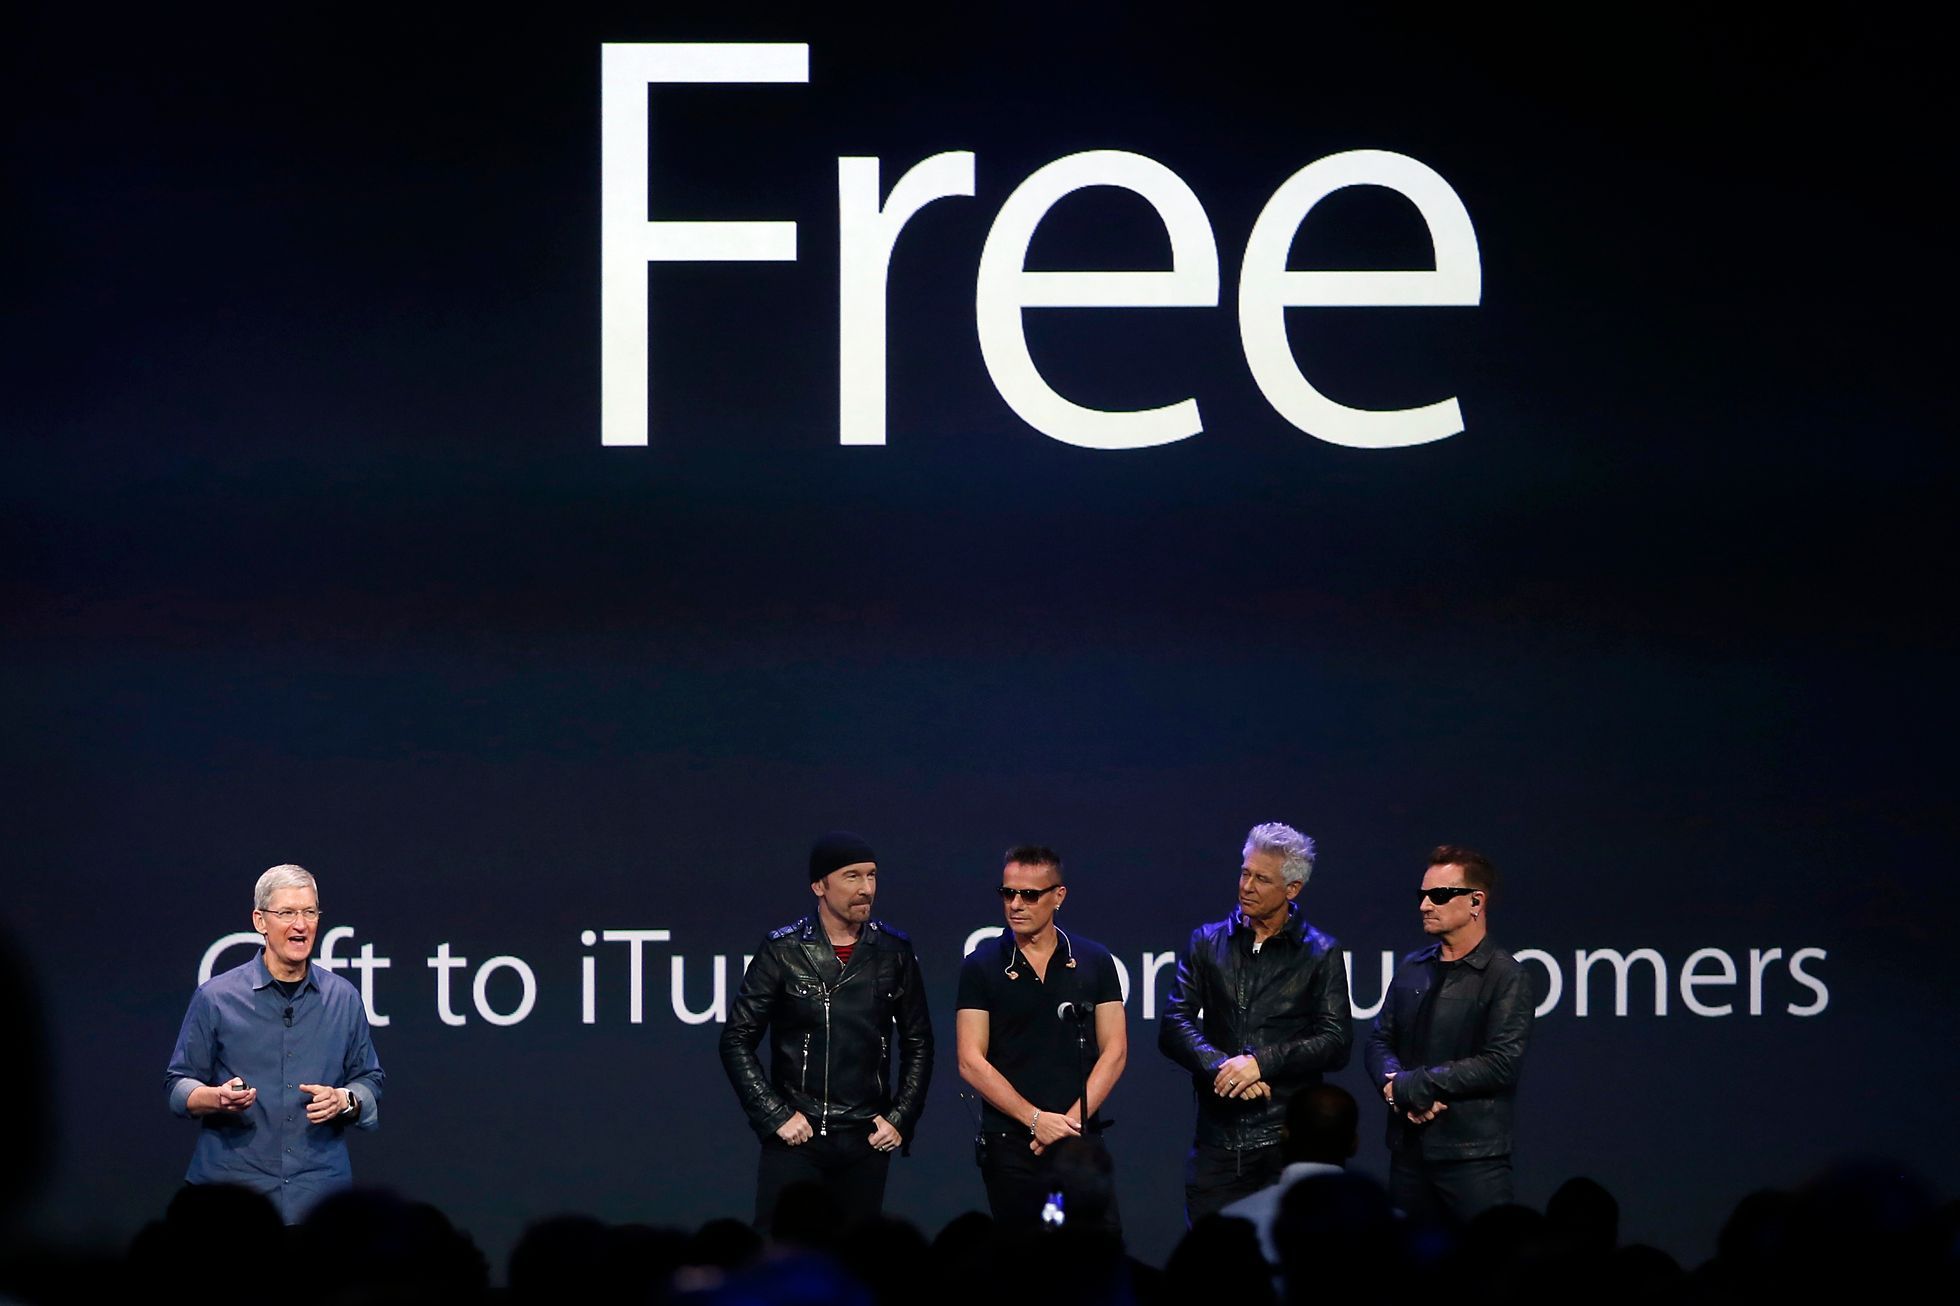 Apple CEO Tim Cook stands with Irish rock band U2 as he speaks during an Apple event announcing the iPhone 6 and the Apple Watch at the Flint Center in Cupertino